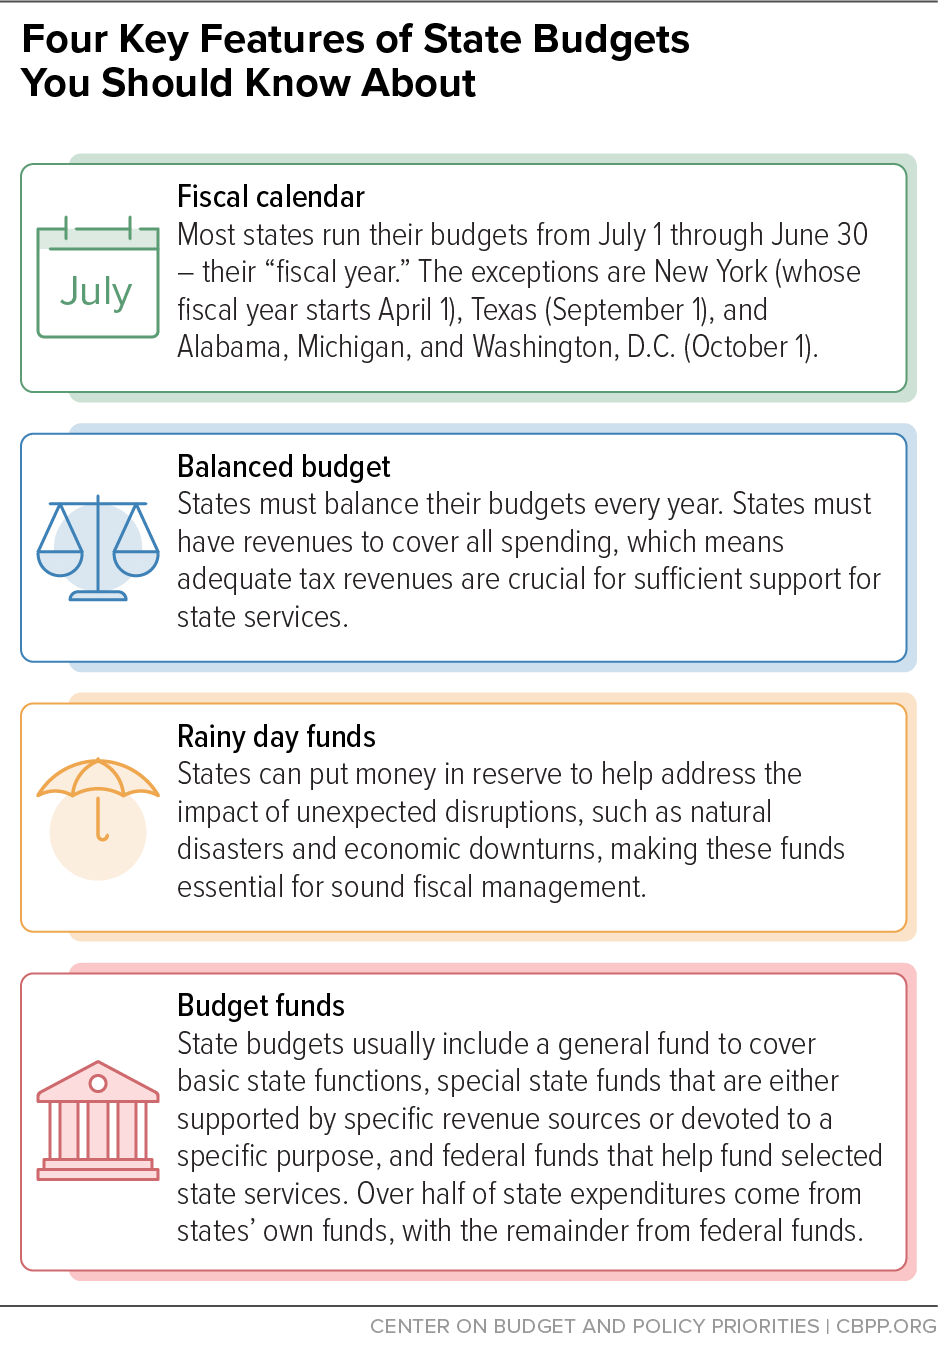 Four Key Features of State Budgets You Should Know About